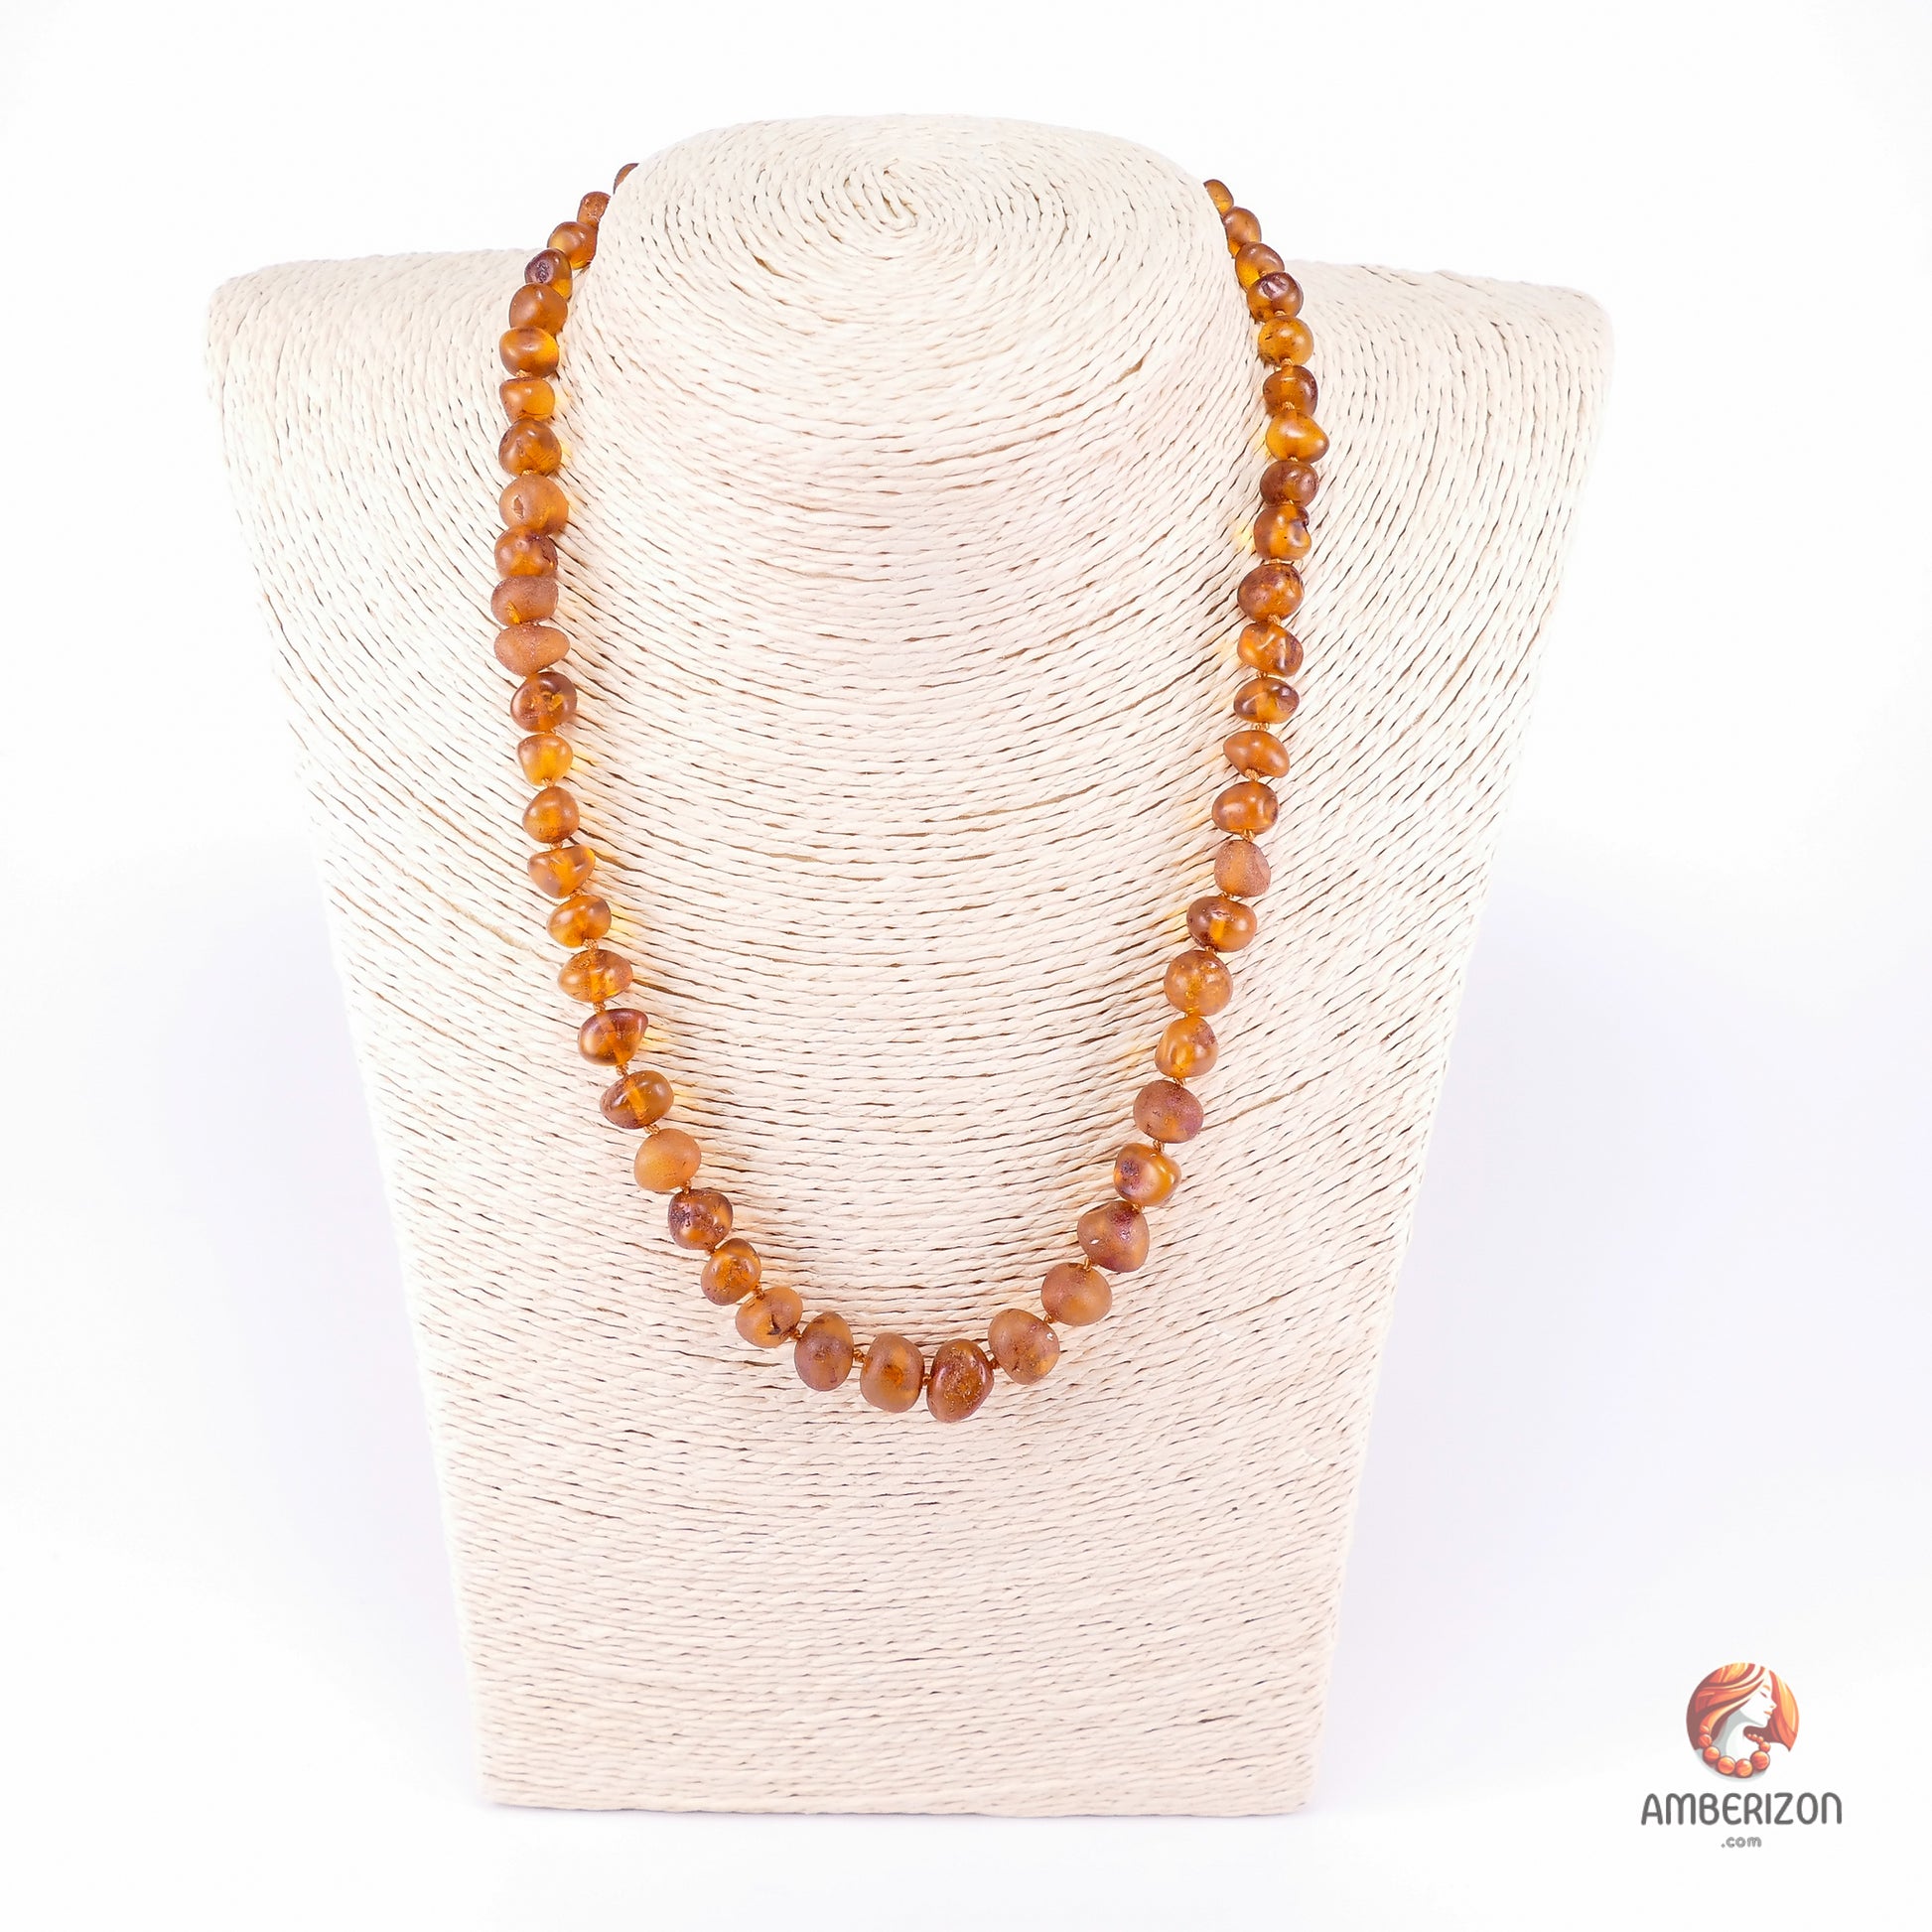 Authentic Raw Unpolished Baltic Amber Necklace for Adults - Unisex Everyday Wear (Adults)